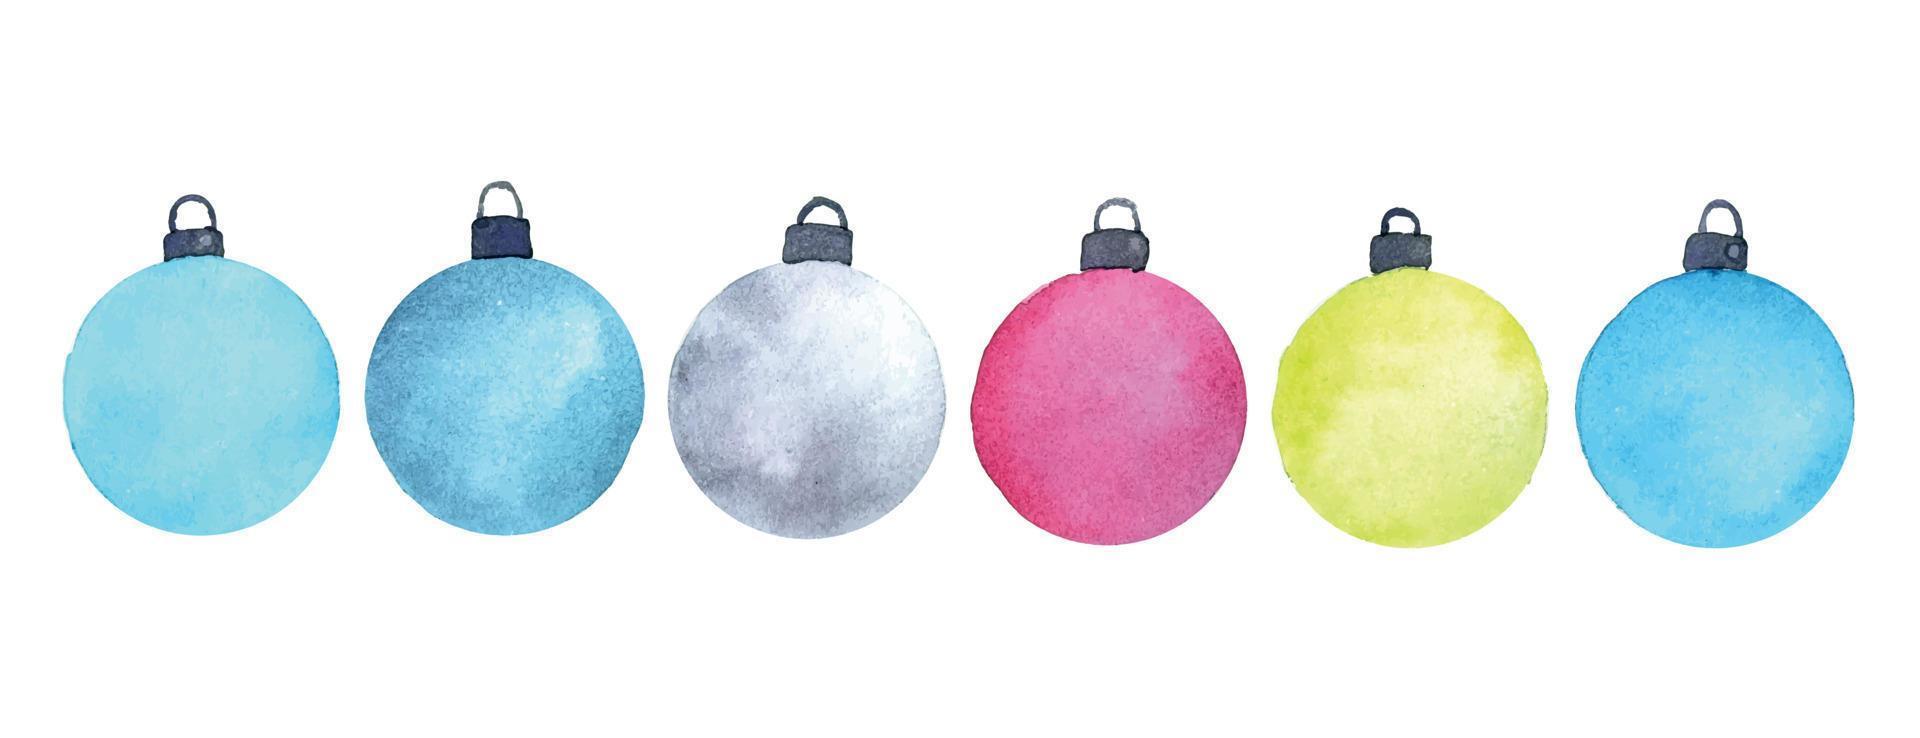 watercolor set with abstract christmas balls. Christmas tree toys of bright colors. simple christmas new year print isolated on white background vector